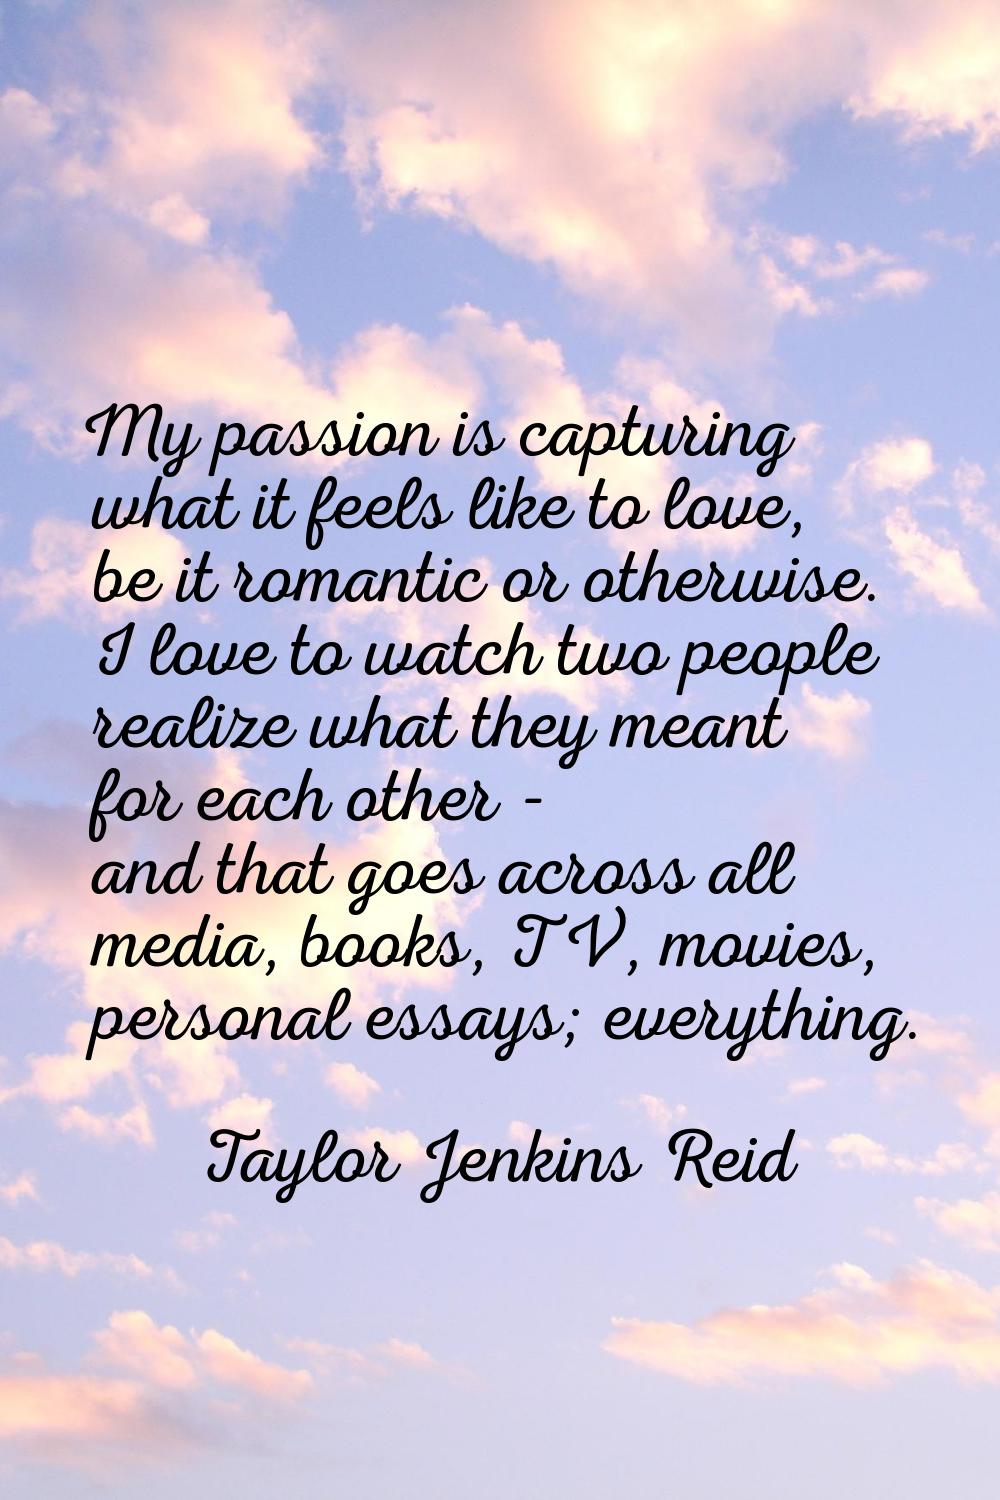 My passion is capturing what it feels like to love, be it romantic or otherwise. I love to watch tw